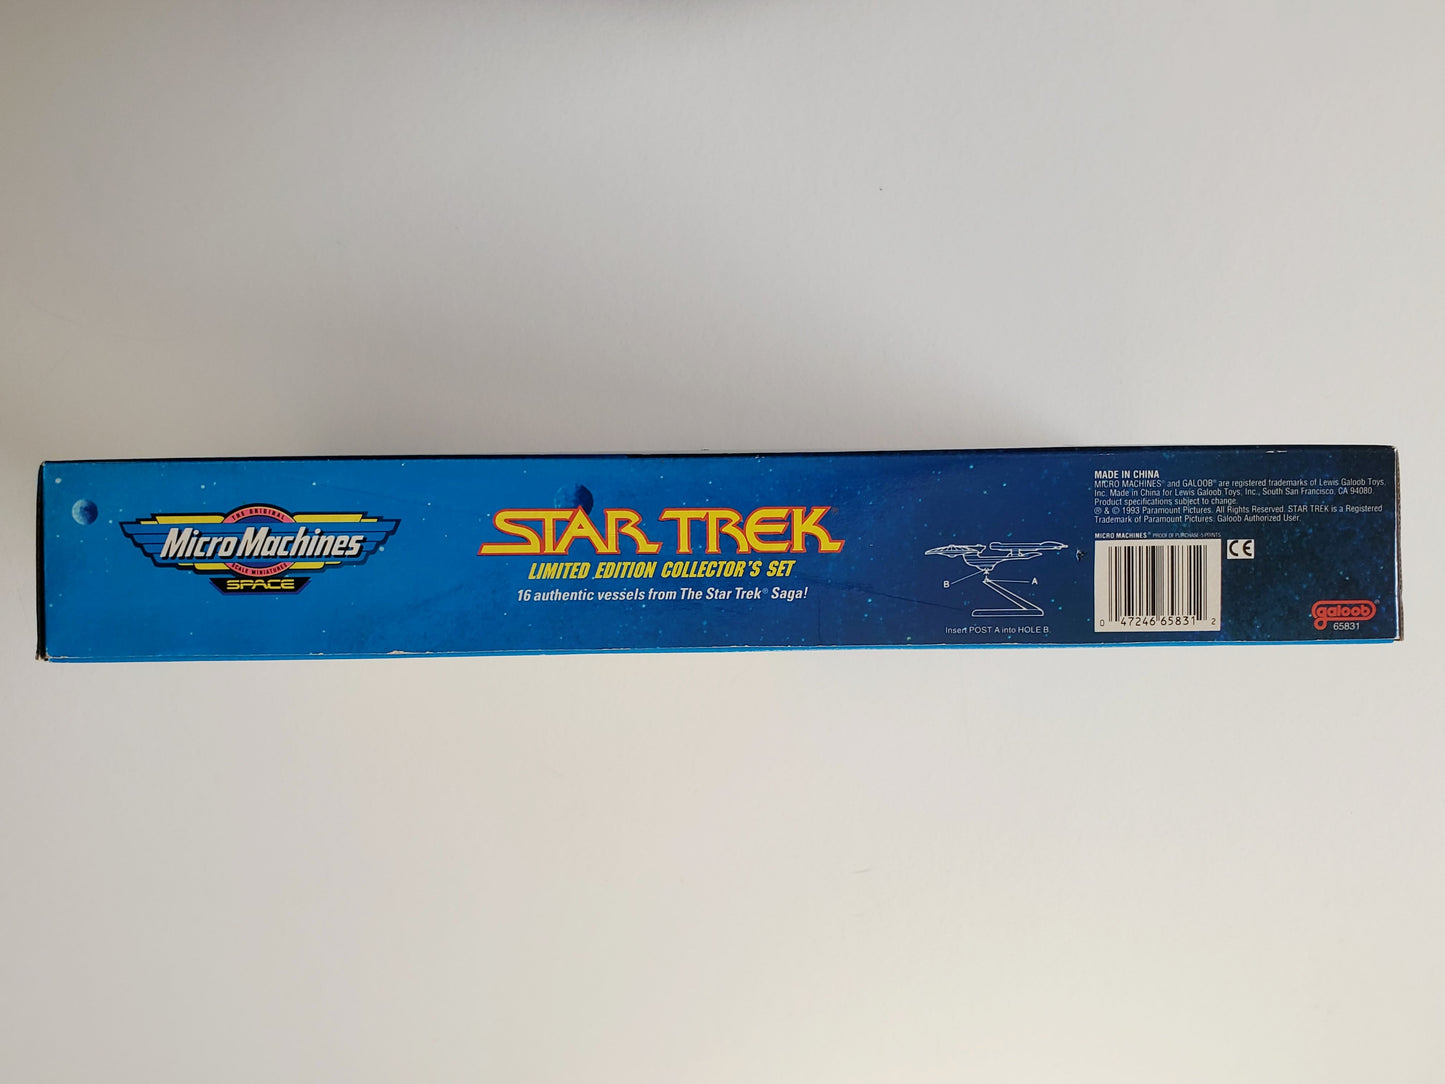 Micro Machines Star Trek Limited Edition Collector's Set